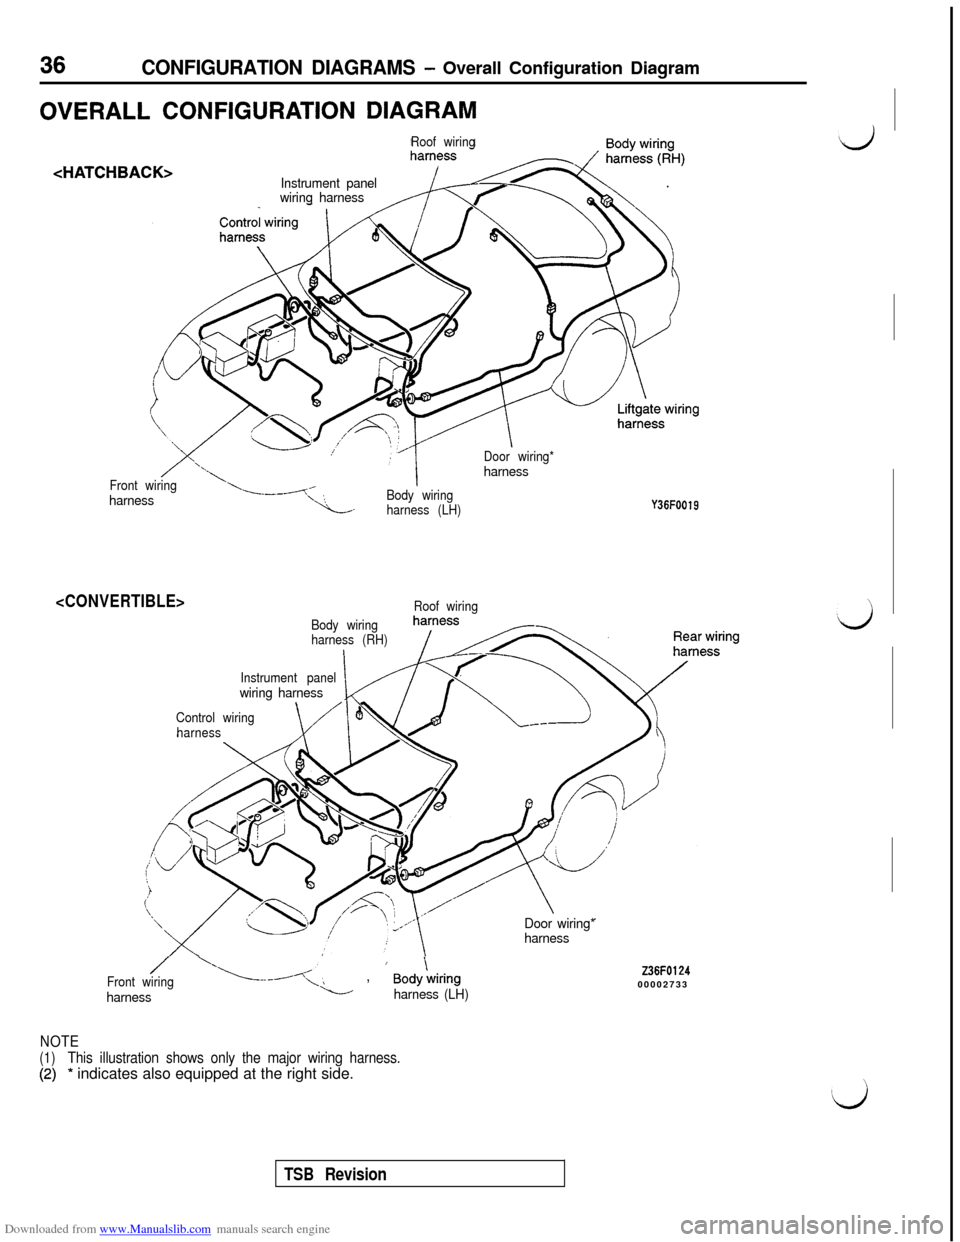 MITSUBISHI 3000GT 1992 2.G Owners Guide Downloaded from www.Manualslib.com manuals search engine 36CONFIGURATION DIAGRAMS - Overall Configuration Diagram
OVERALL CONFIGURATION DIAGRAM
<HAT1
Roof wiring
CHBACK>Instrument panel
wiring harness